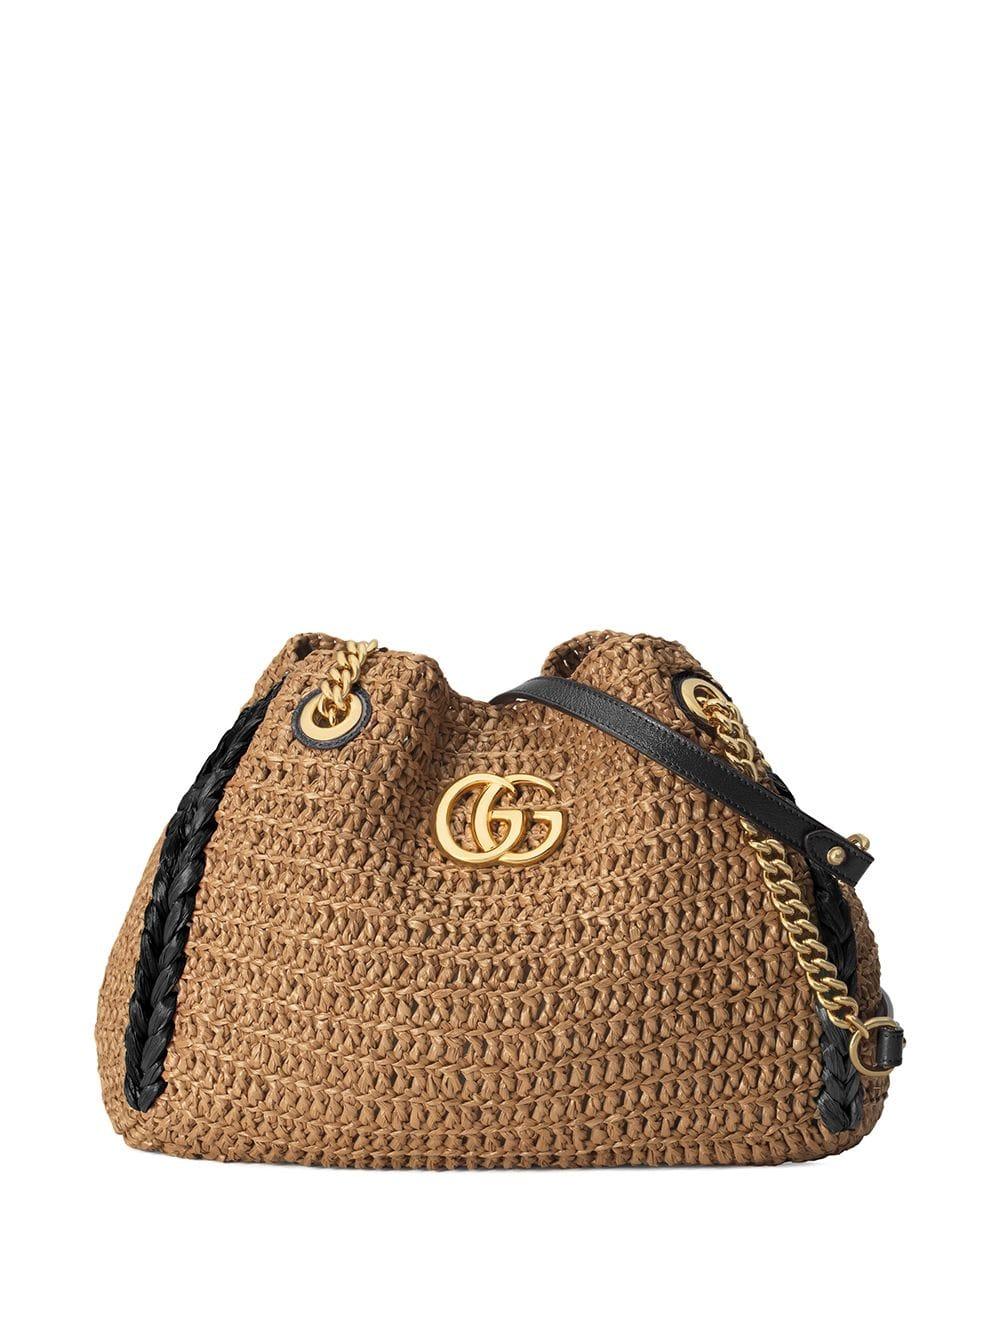 Gucci GG Marmont Medium Tote Bag - Save 8% - Lyst